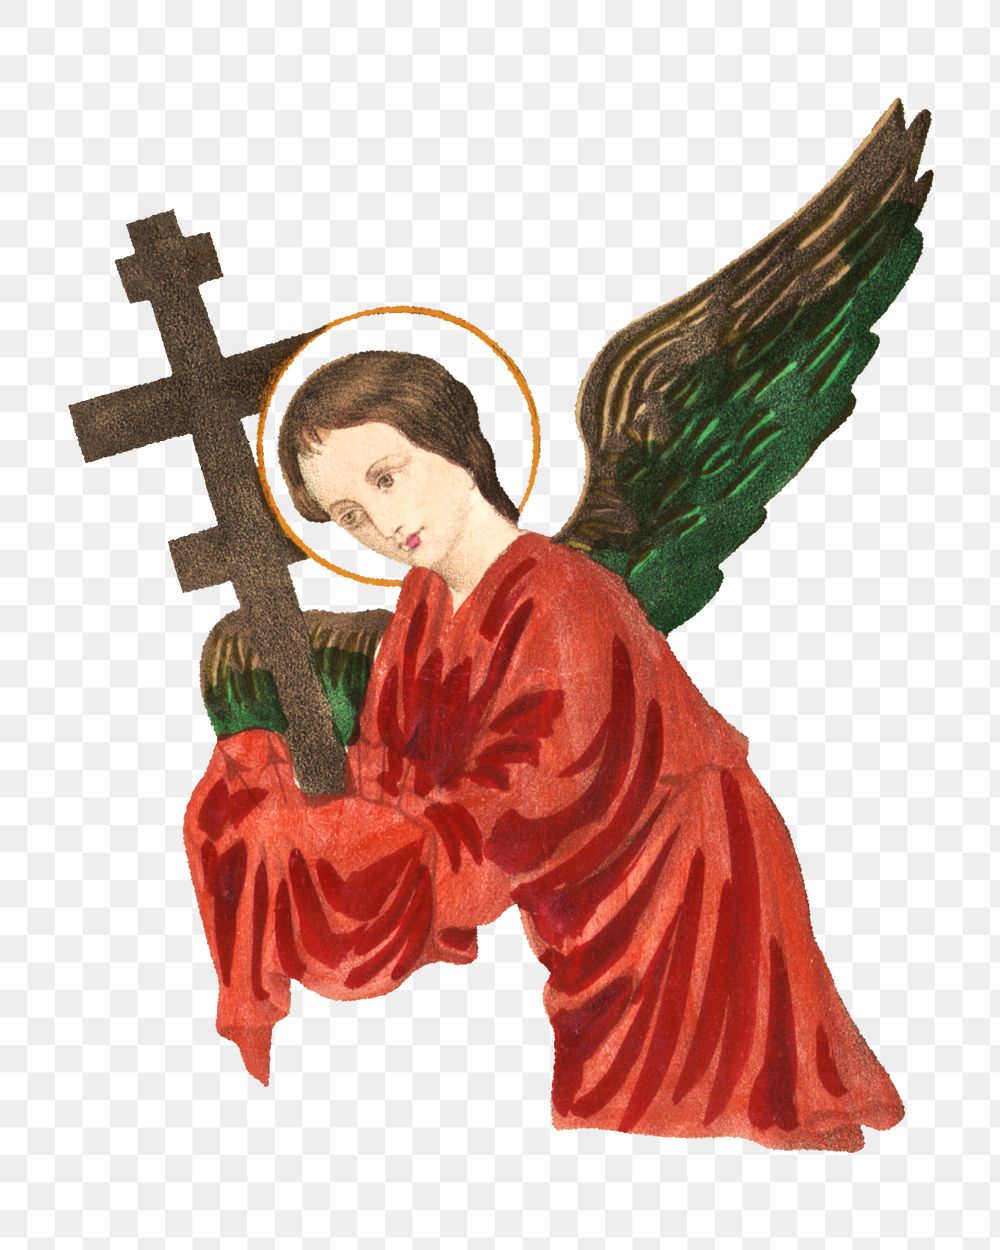 Angel holding cross png sticker, vintage religious on transparent background.   Remastered by rawpixel